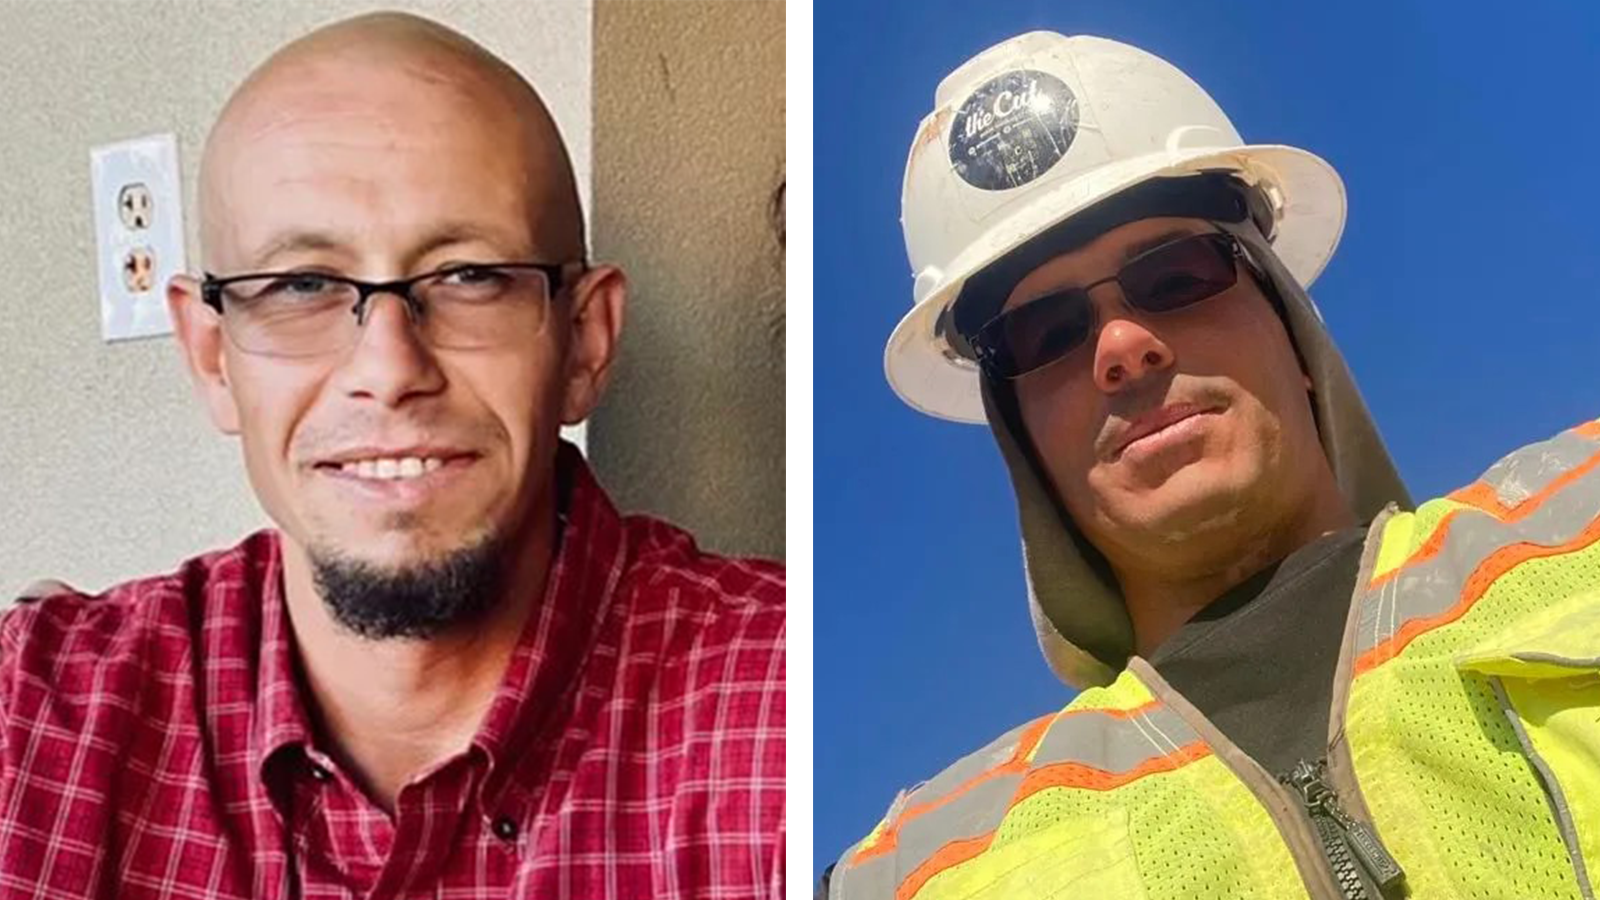 Rudy Mori (left) and Alex Quaresma were working in a trench at a west Phoenix housing development when the trench collapsed and killed both men in July 2020.